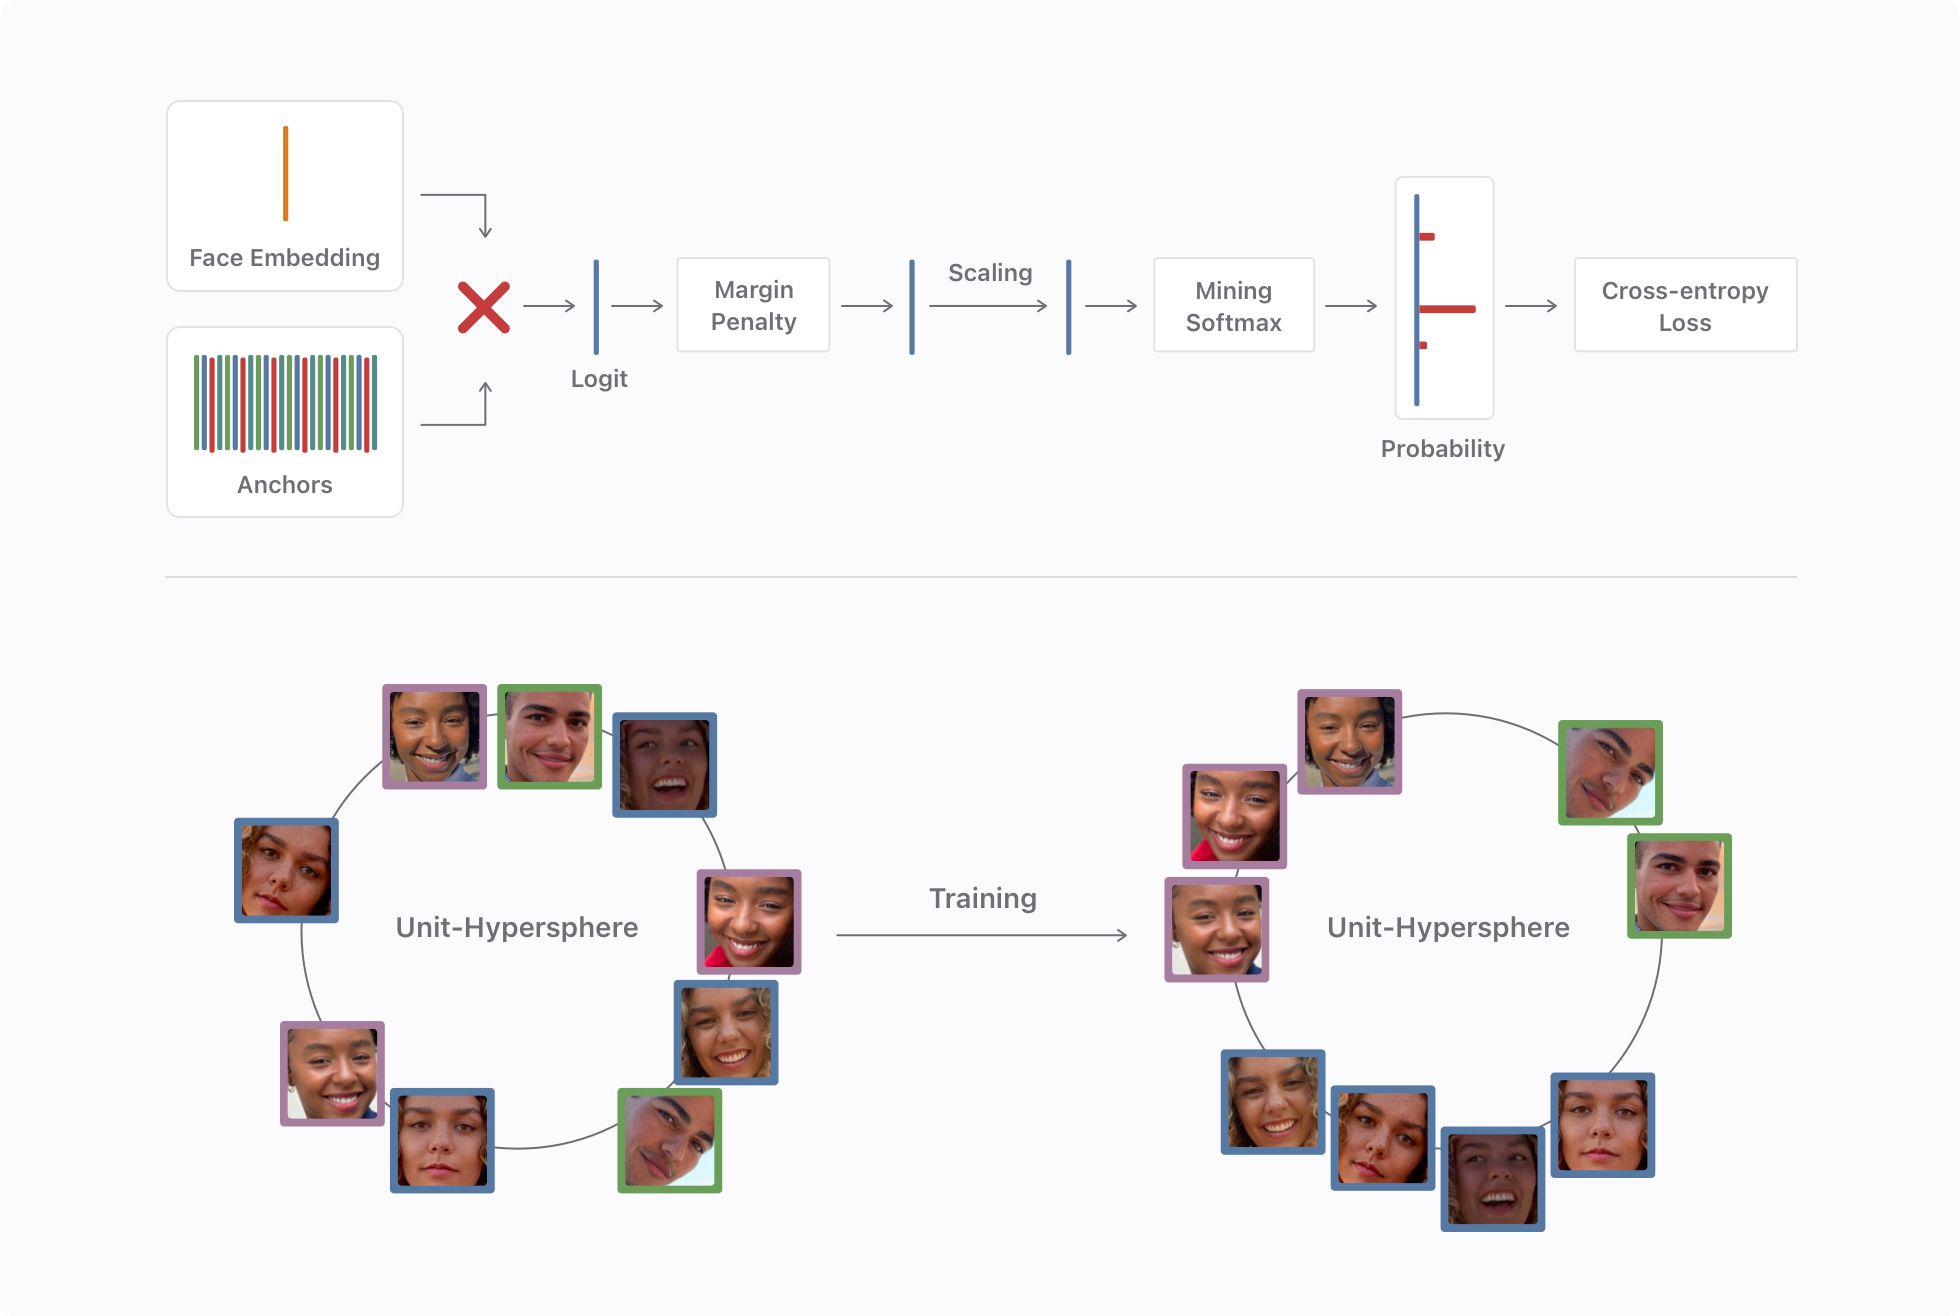 Figure 6: Model training procedure and distribution of the face embeddings before and after training.